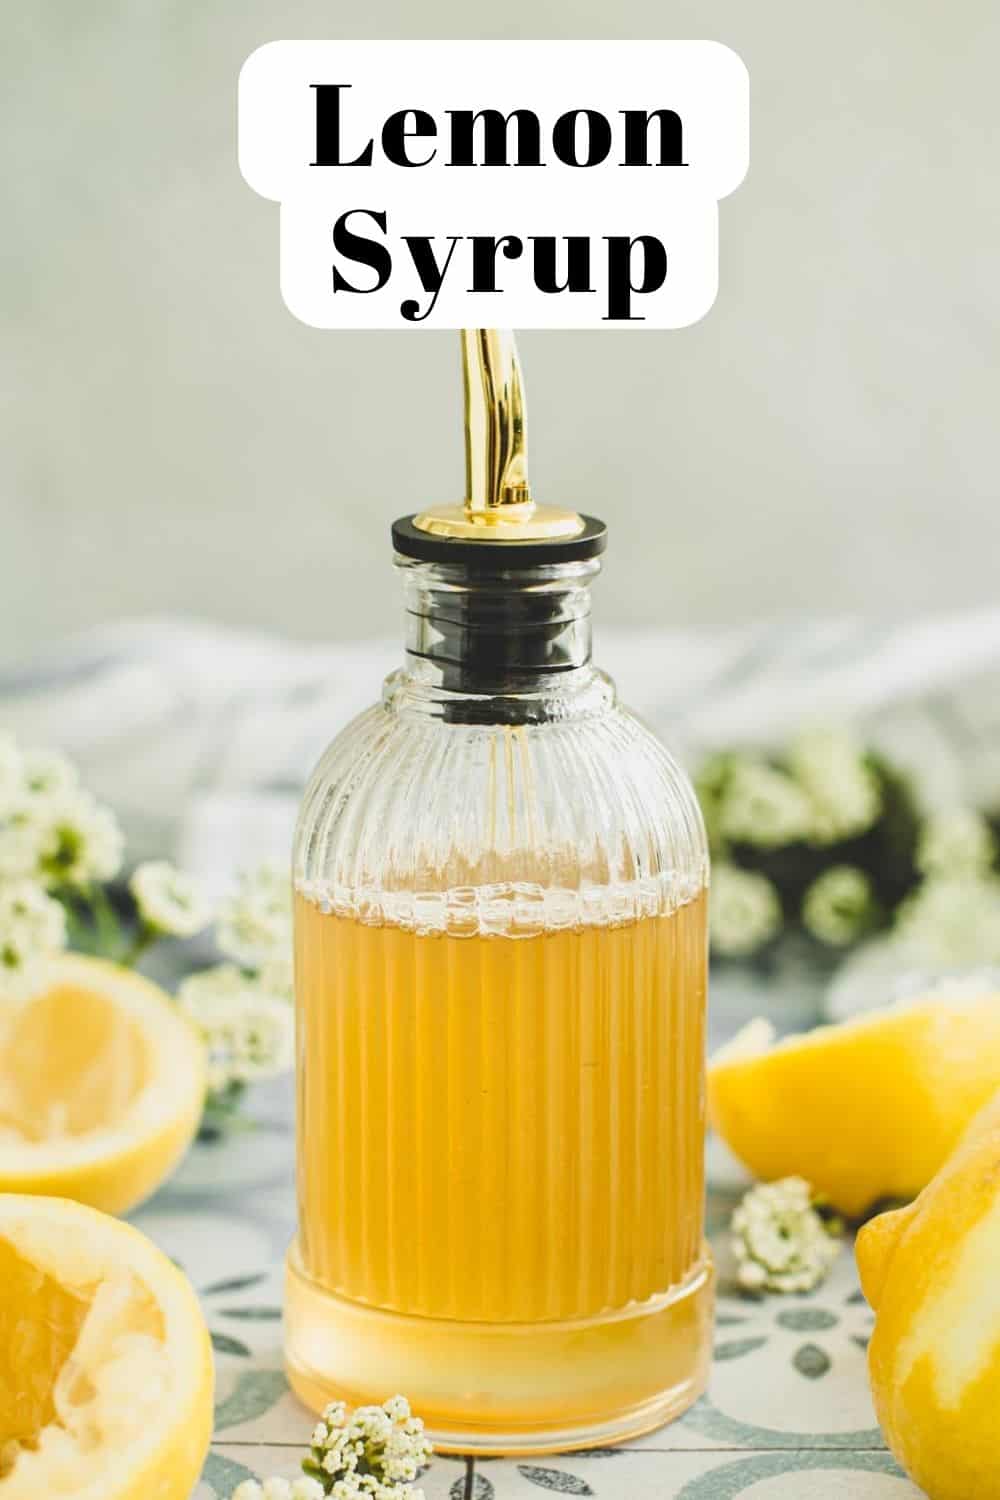 Lemon syrup in a bottle with a stopper.